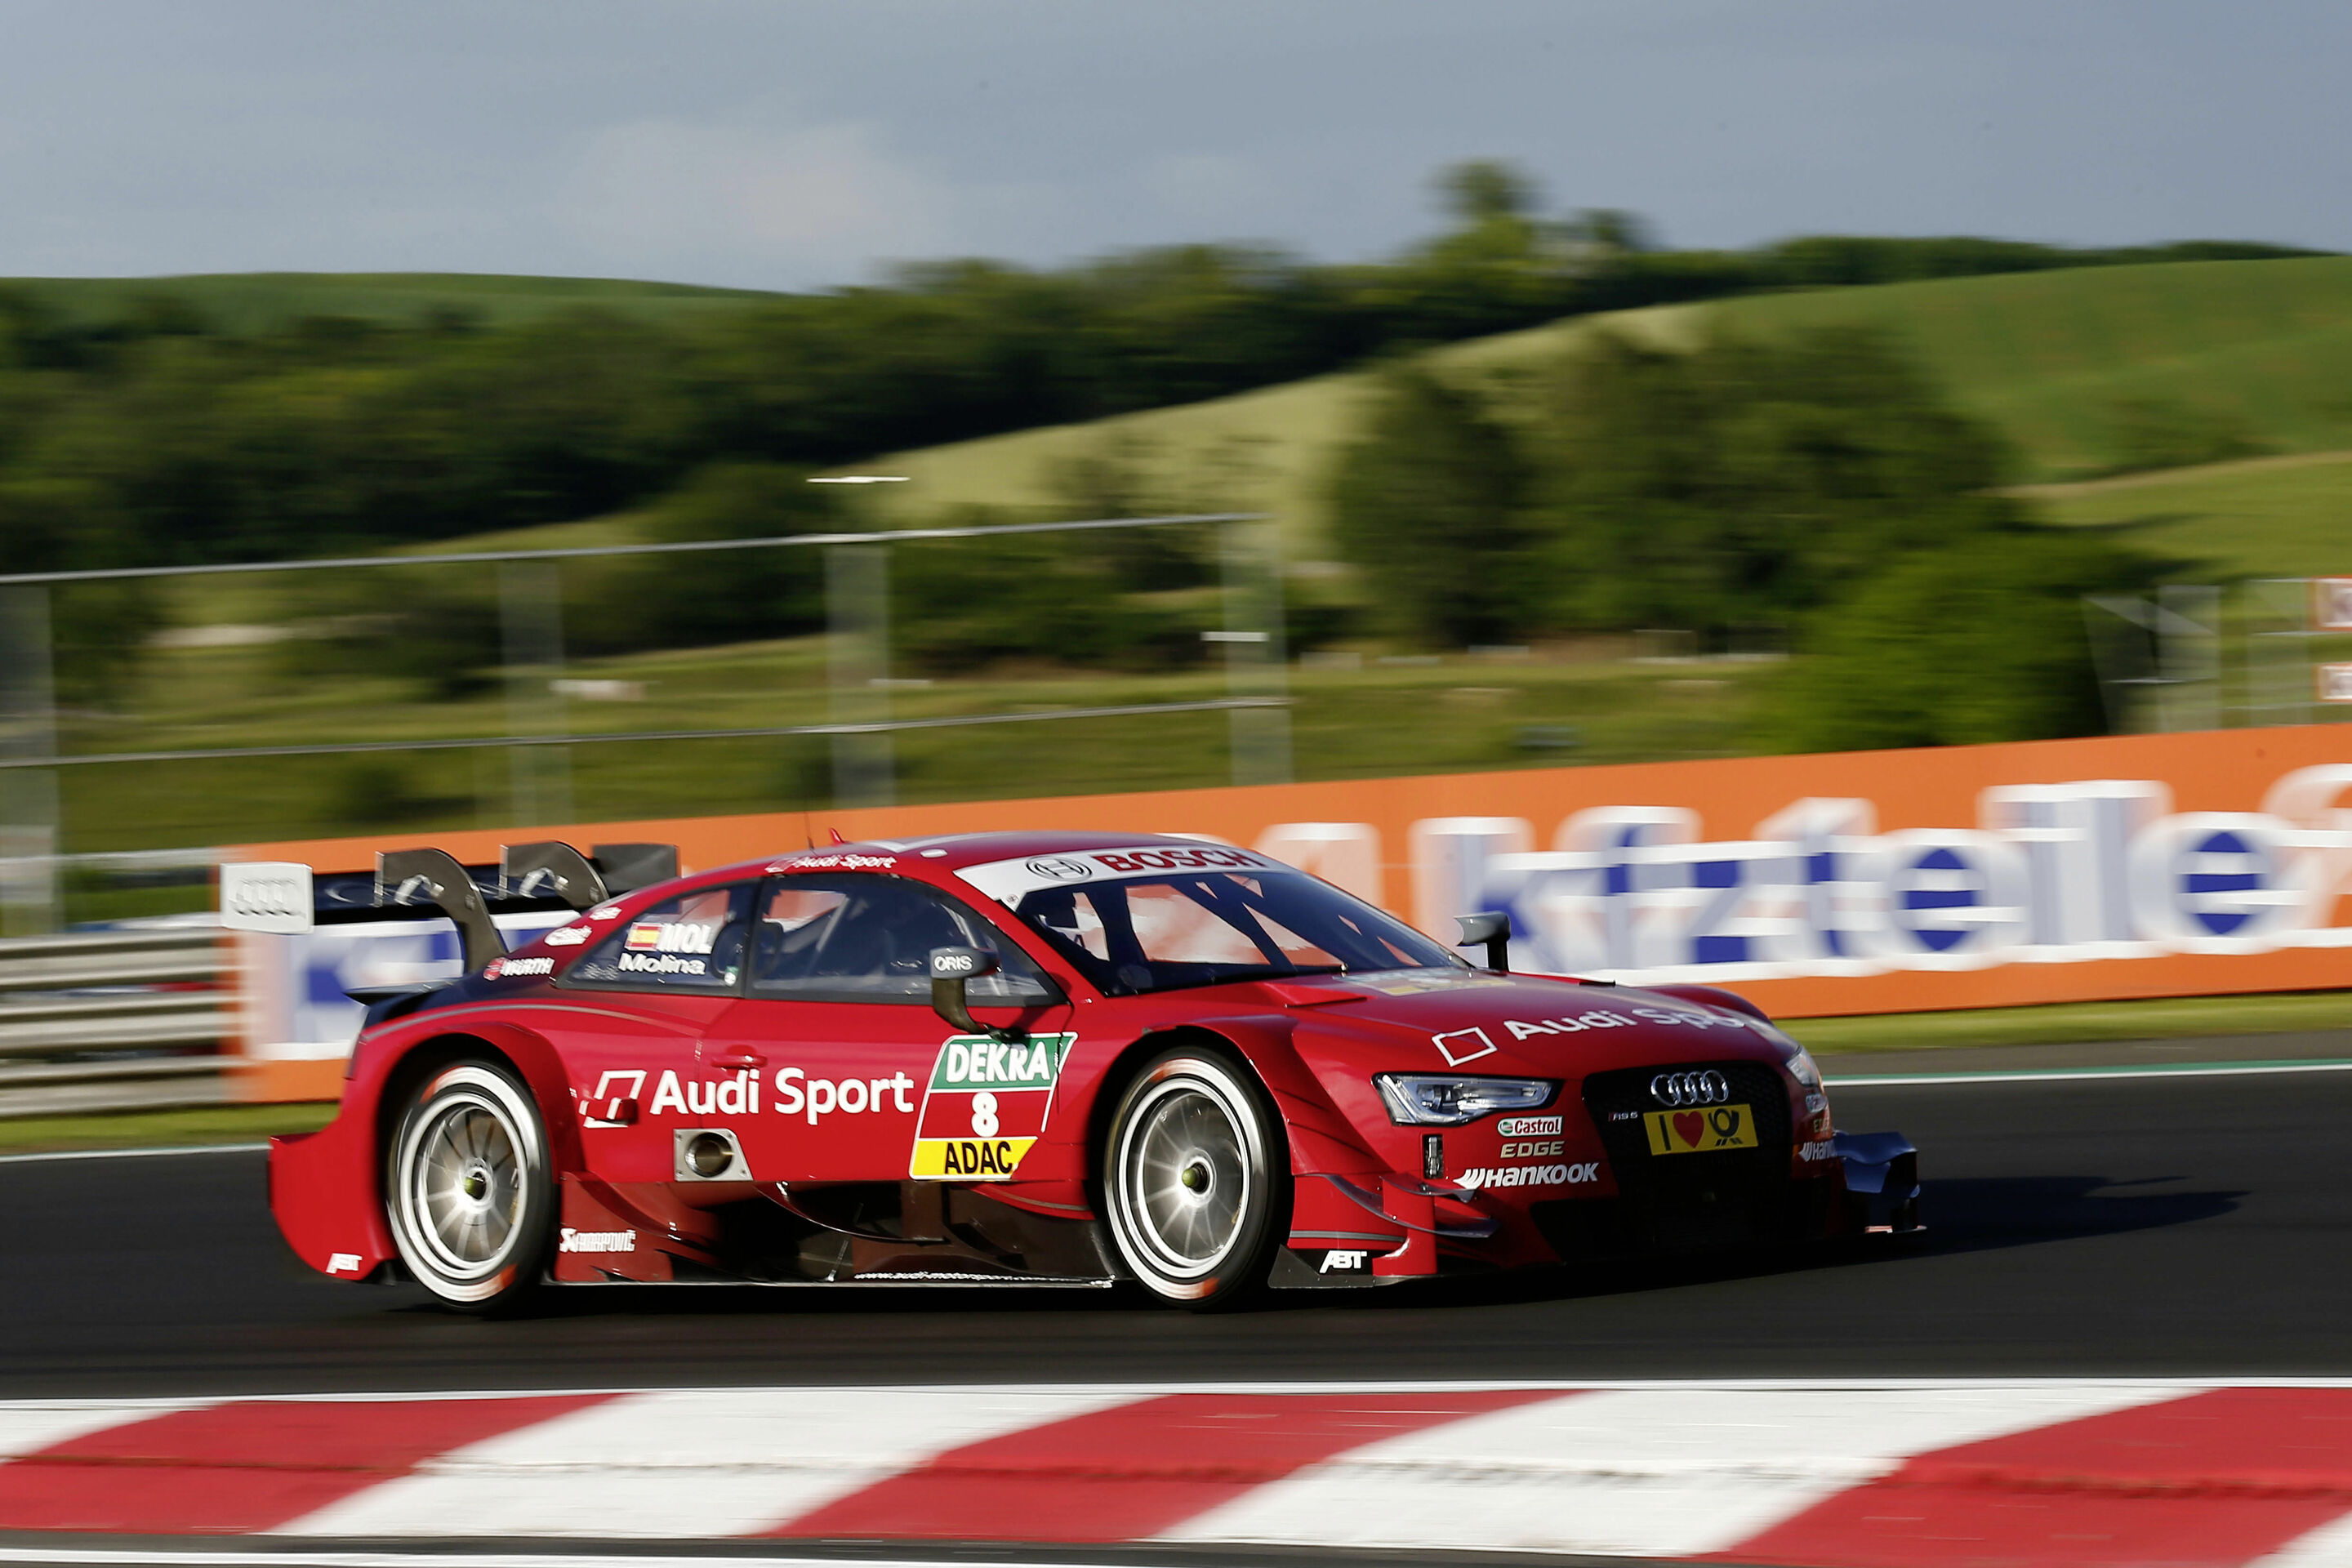 Miguel Molina clinches grid position three for Audi